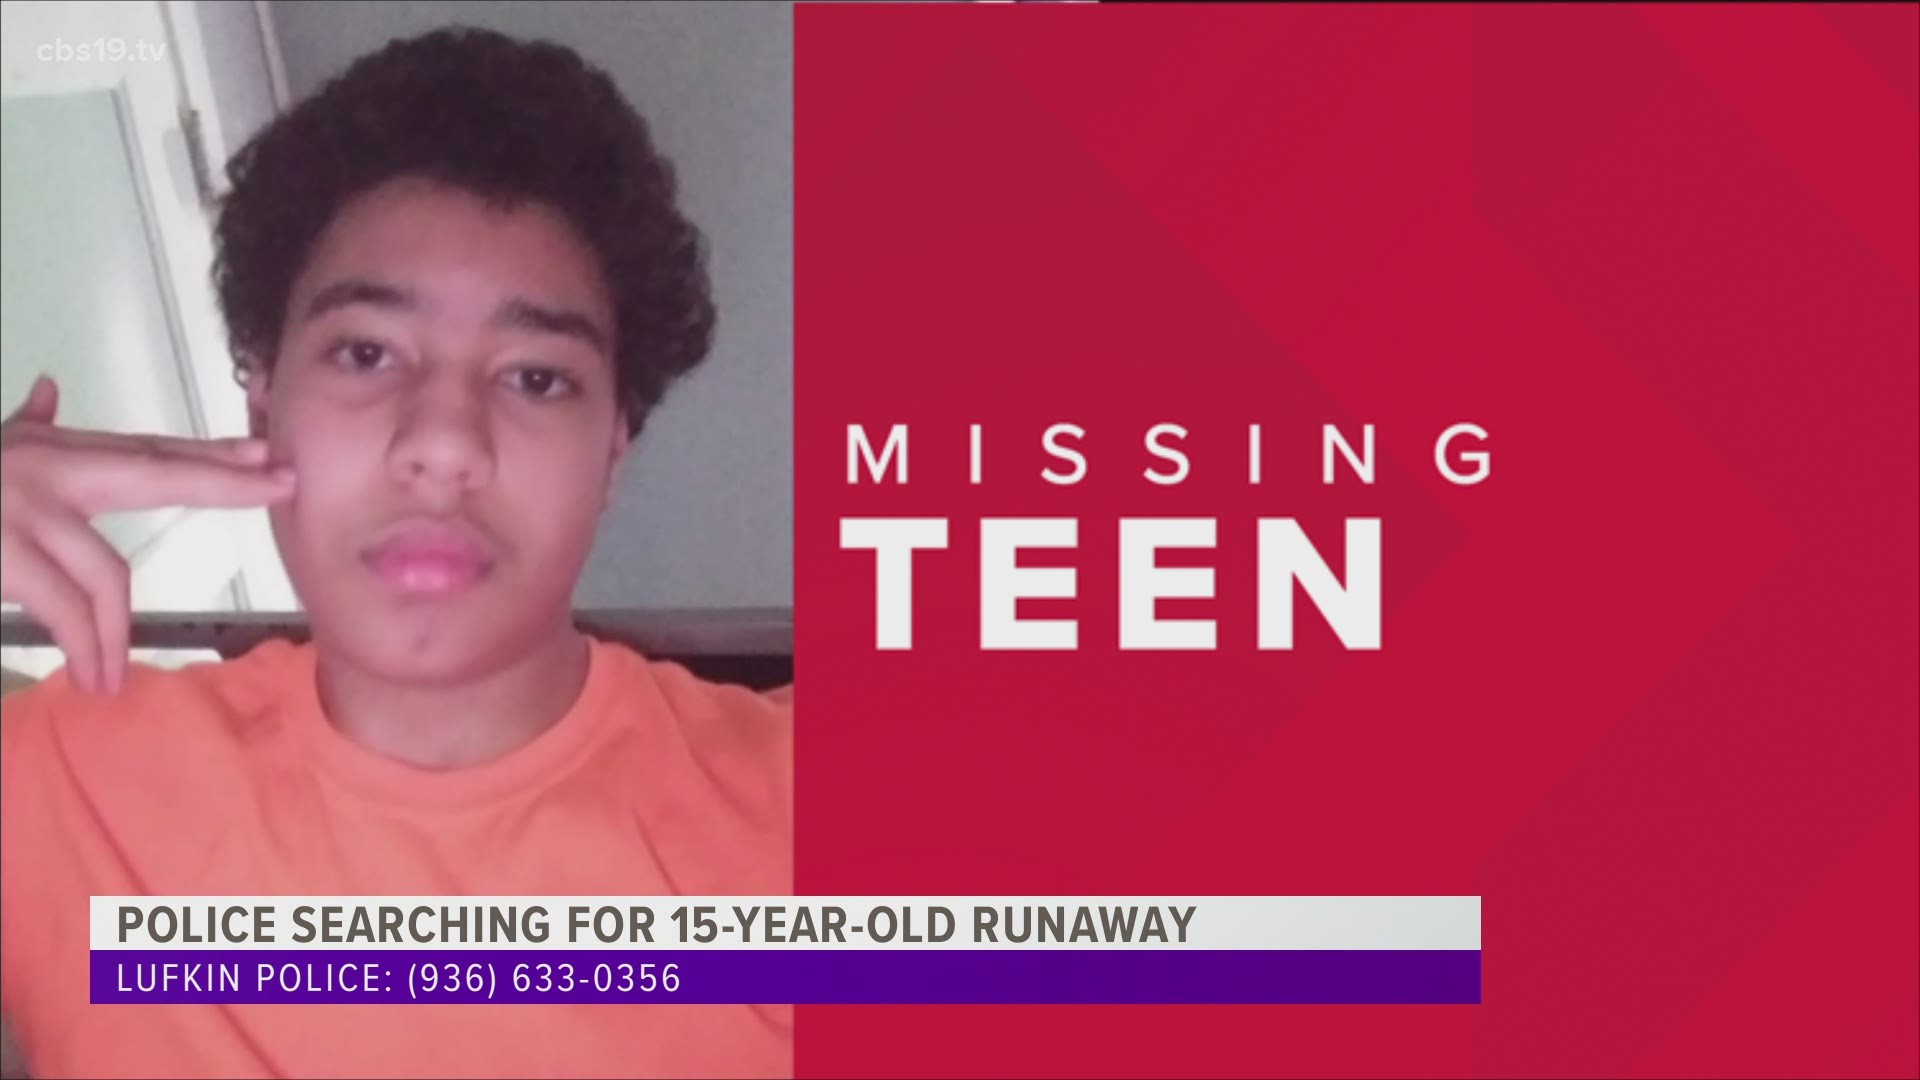 The Lufkin Police Department is seeking the public's help in locating a 15-year-old runaway.